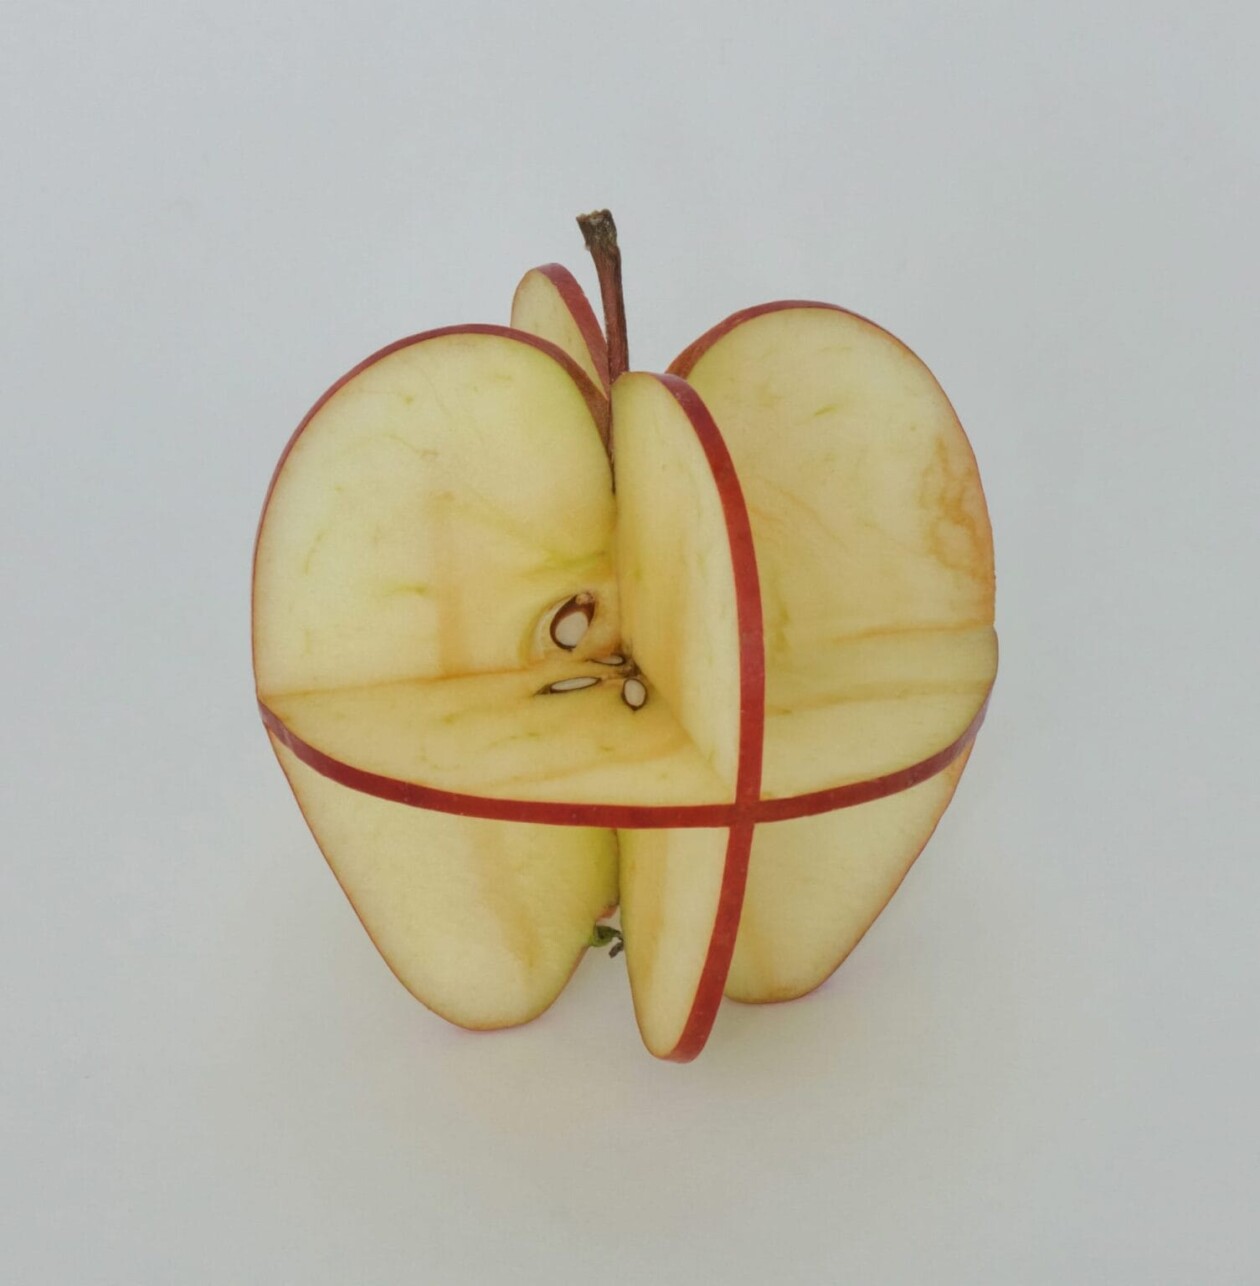 Smart And Playful Sculptures Carved Out Of Apples By Chinese Artist Can Sun (4)